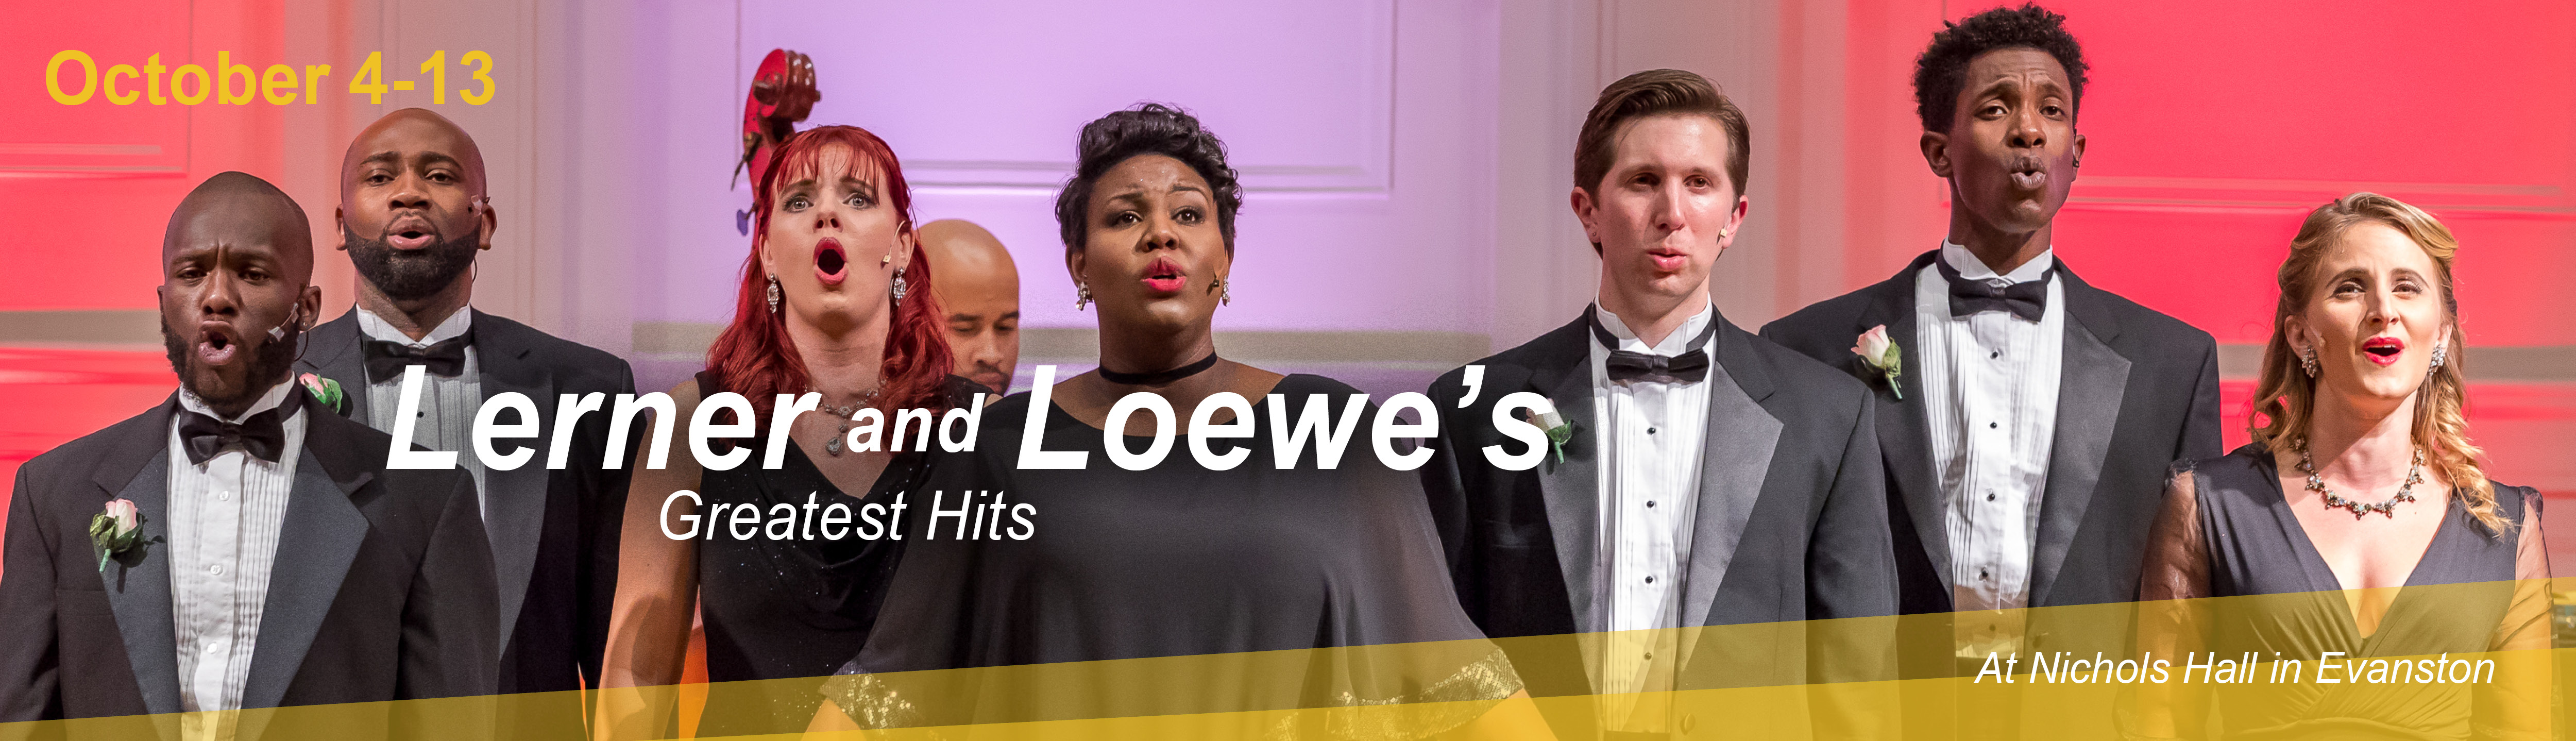 Lerner and Loewe's Greatest Hits at Nichols Concert Hall October 10 to